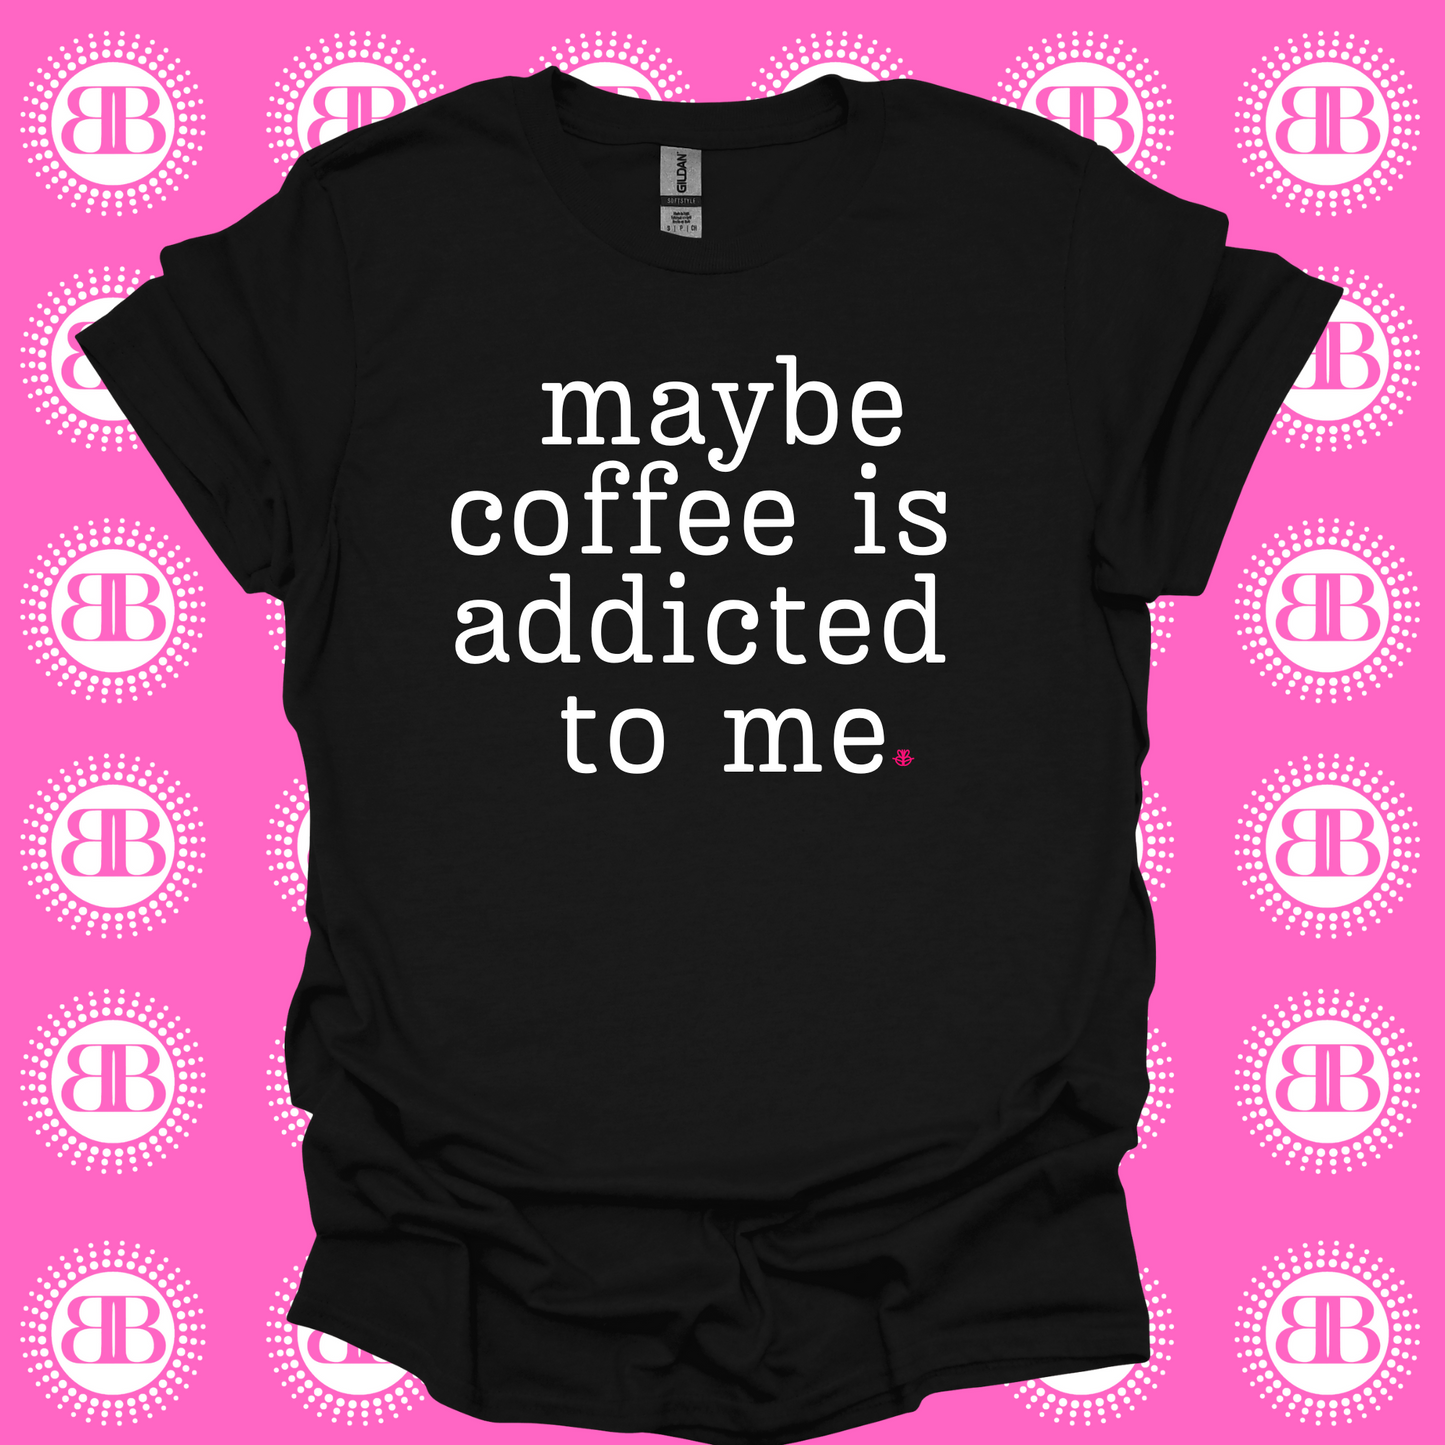 Maybe Coffee Is Addicted to Me